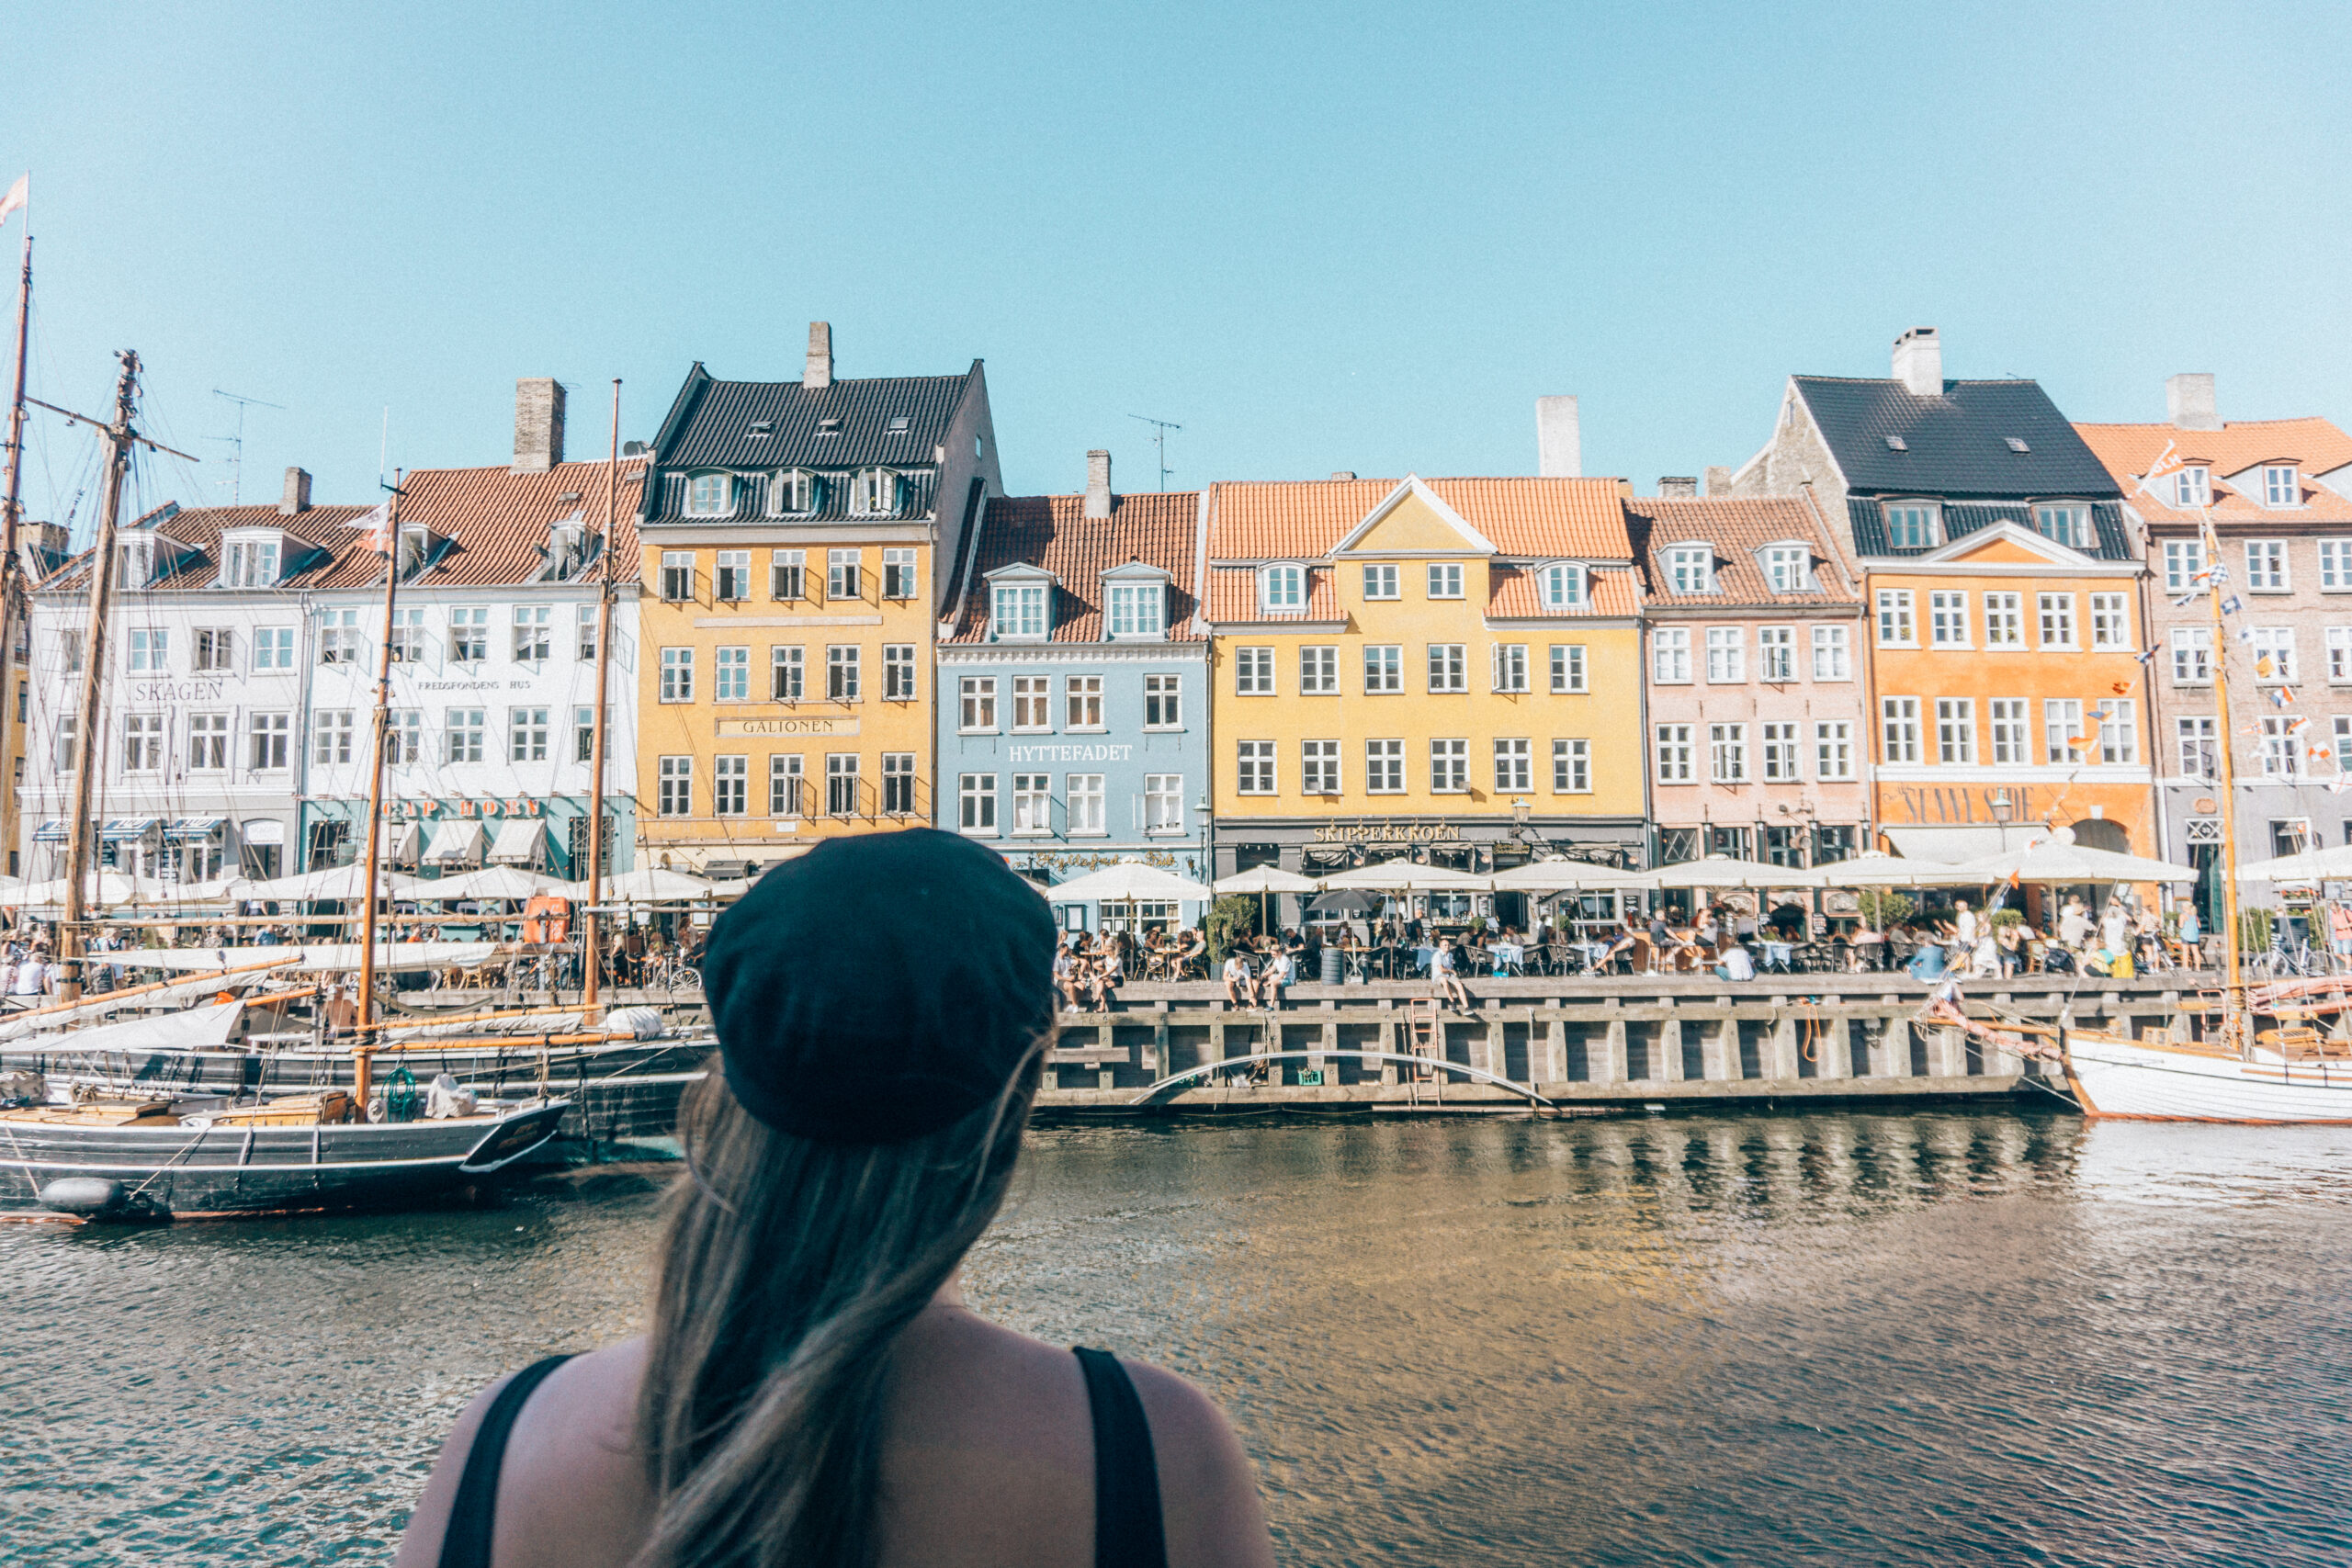 Copenhagen on a Budget: Why the Copenhagen Card is a Must-Have for Travellers